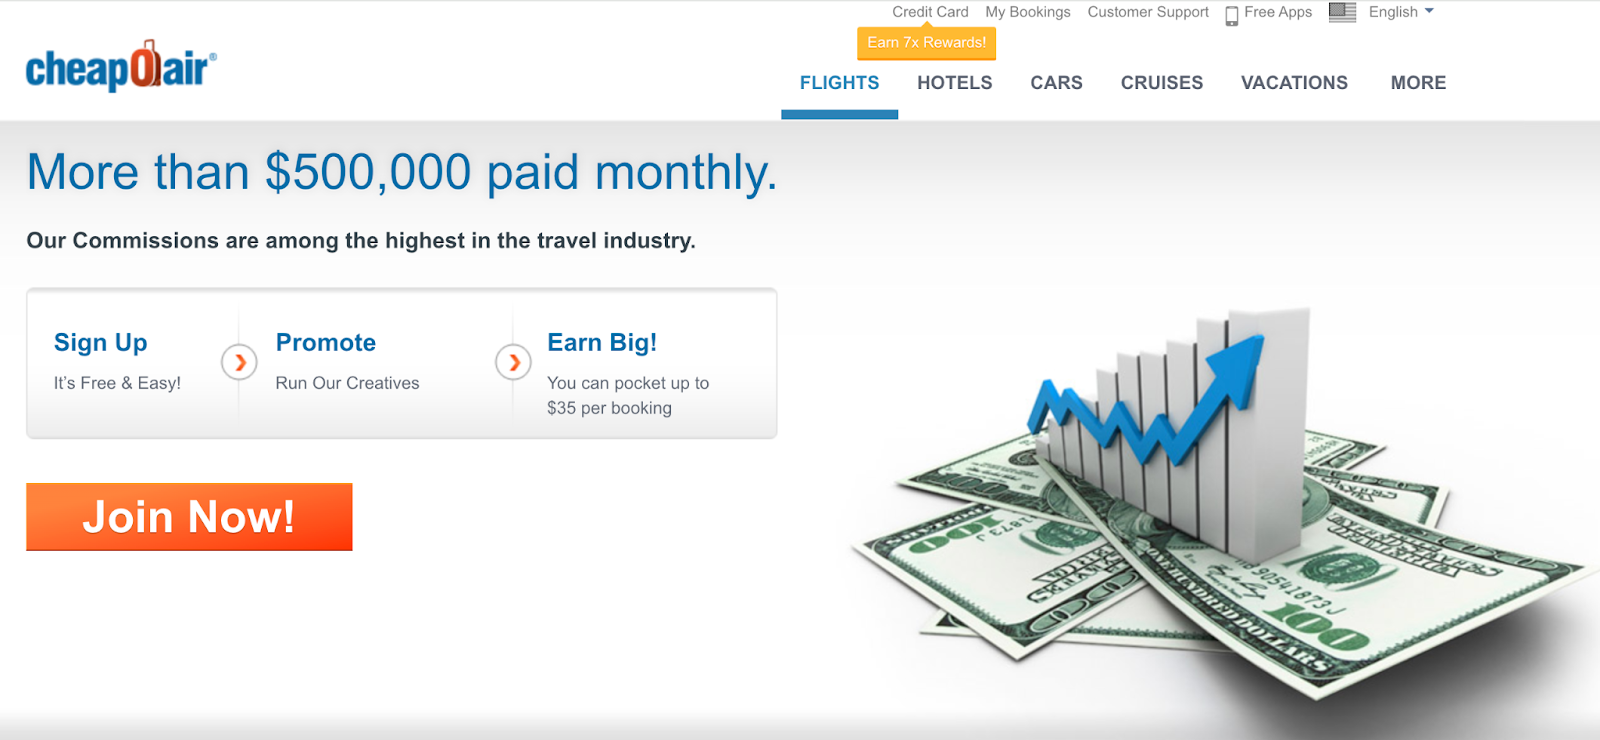 Cheapoair's travel affiliate program page